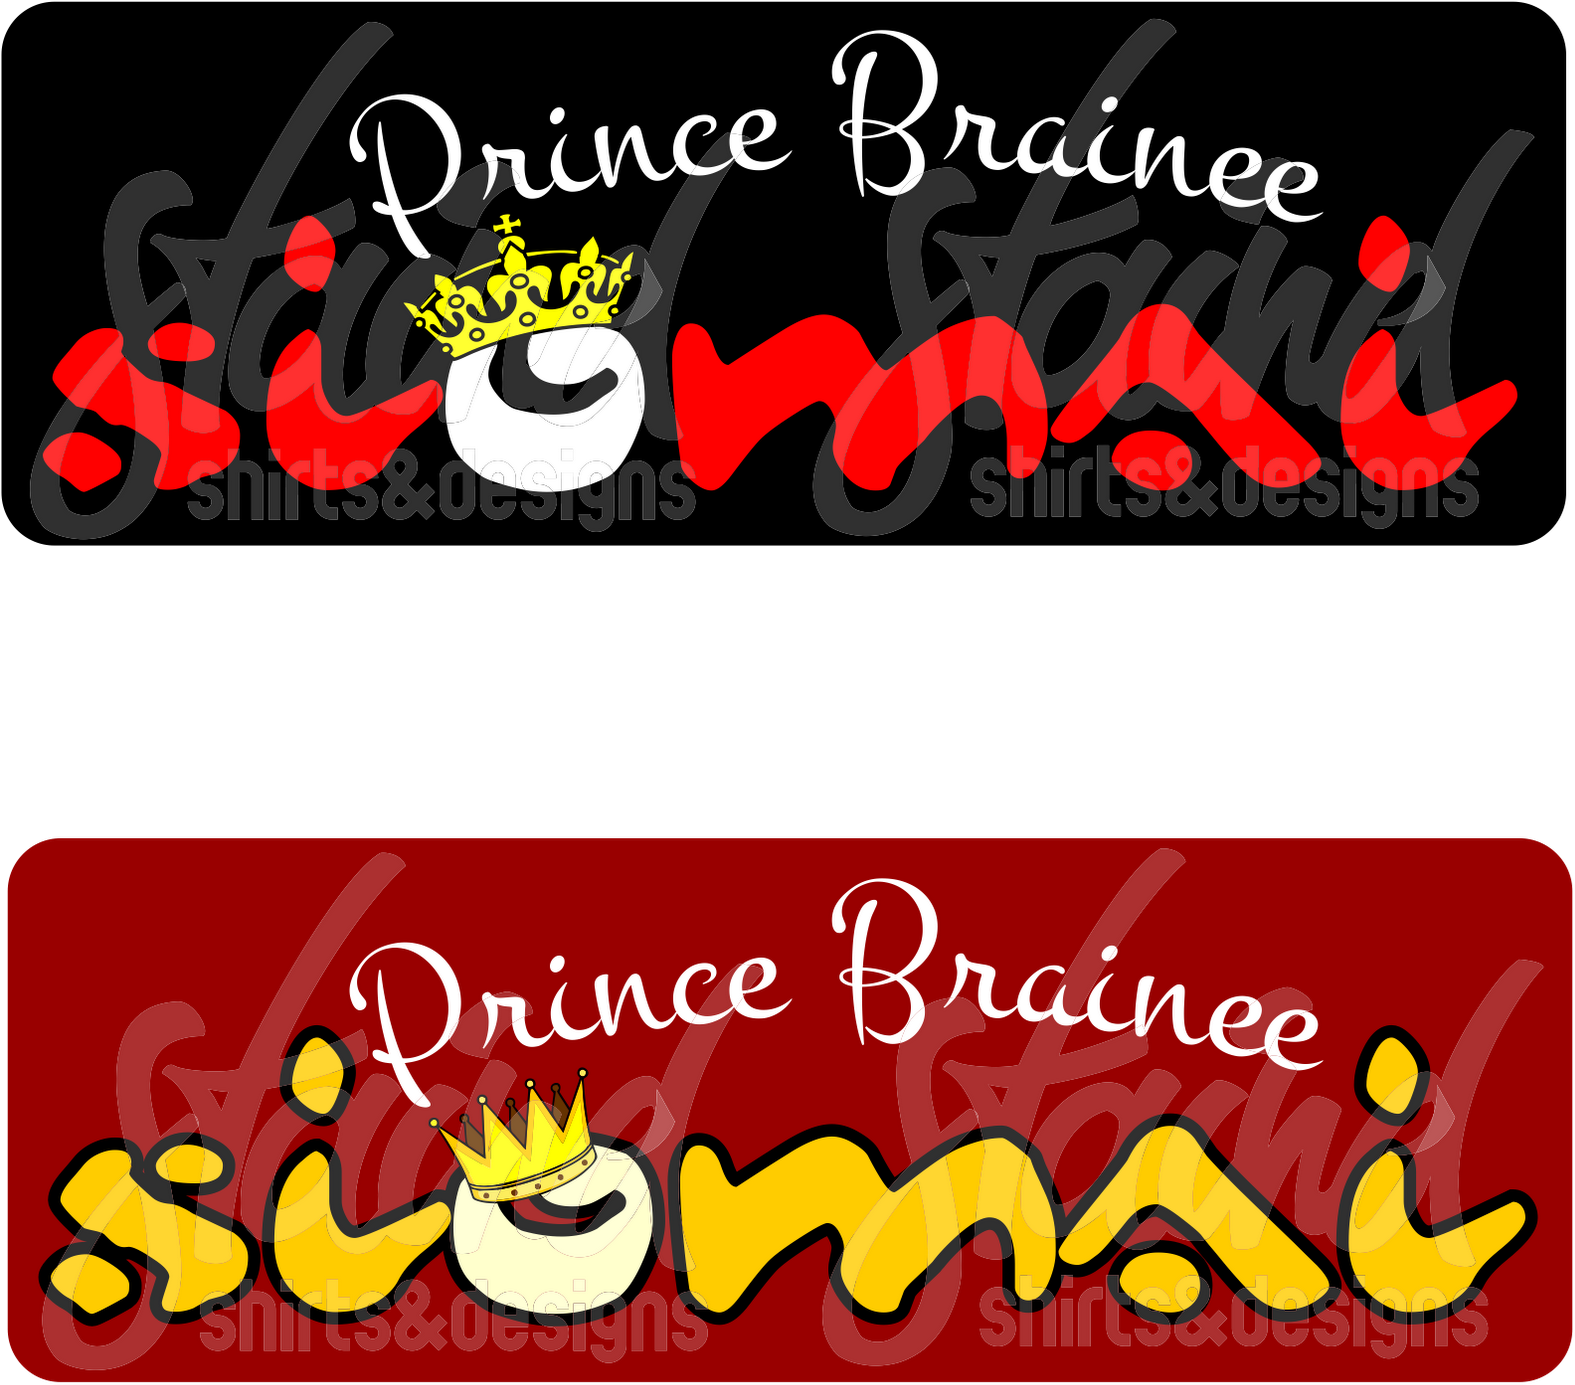 Download Prince Brainee Siomai Logo Prince Siomai Png Image With No Background